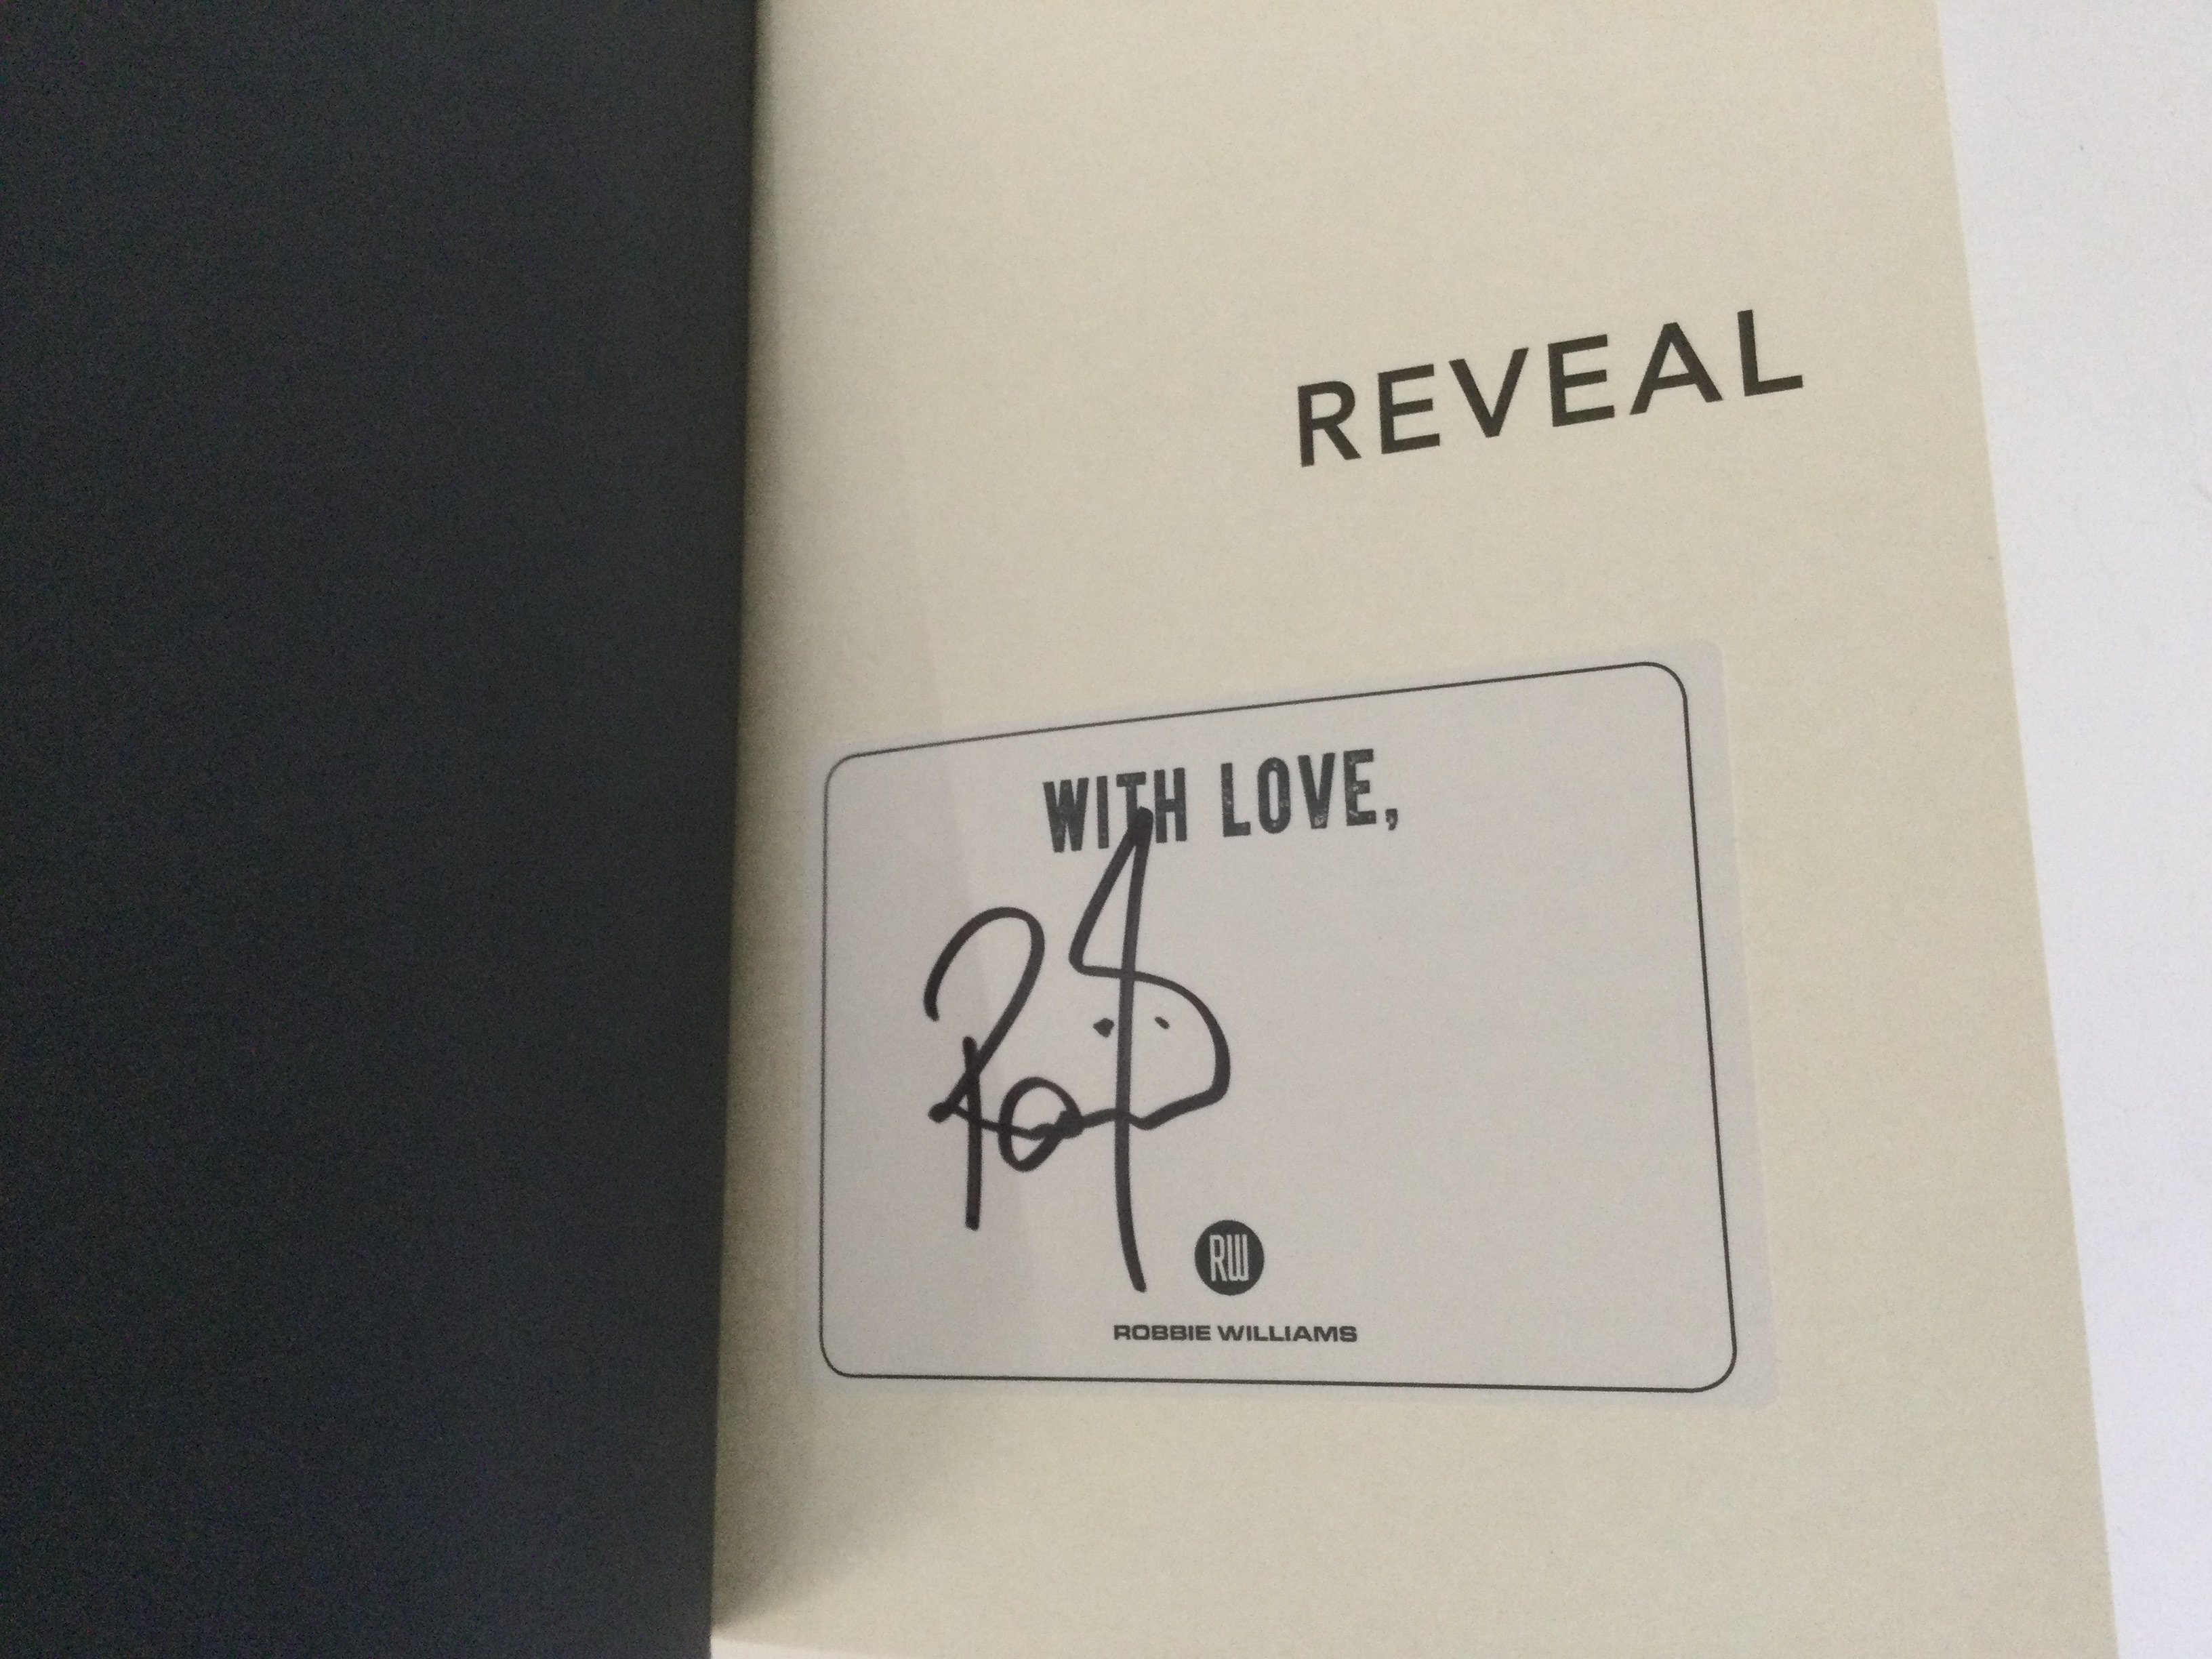 A signed Robbie Williams book 'Reveal' together wi - Image 2 of 2